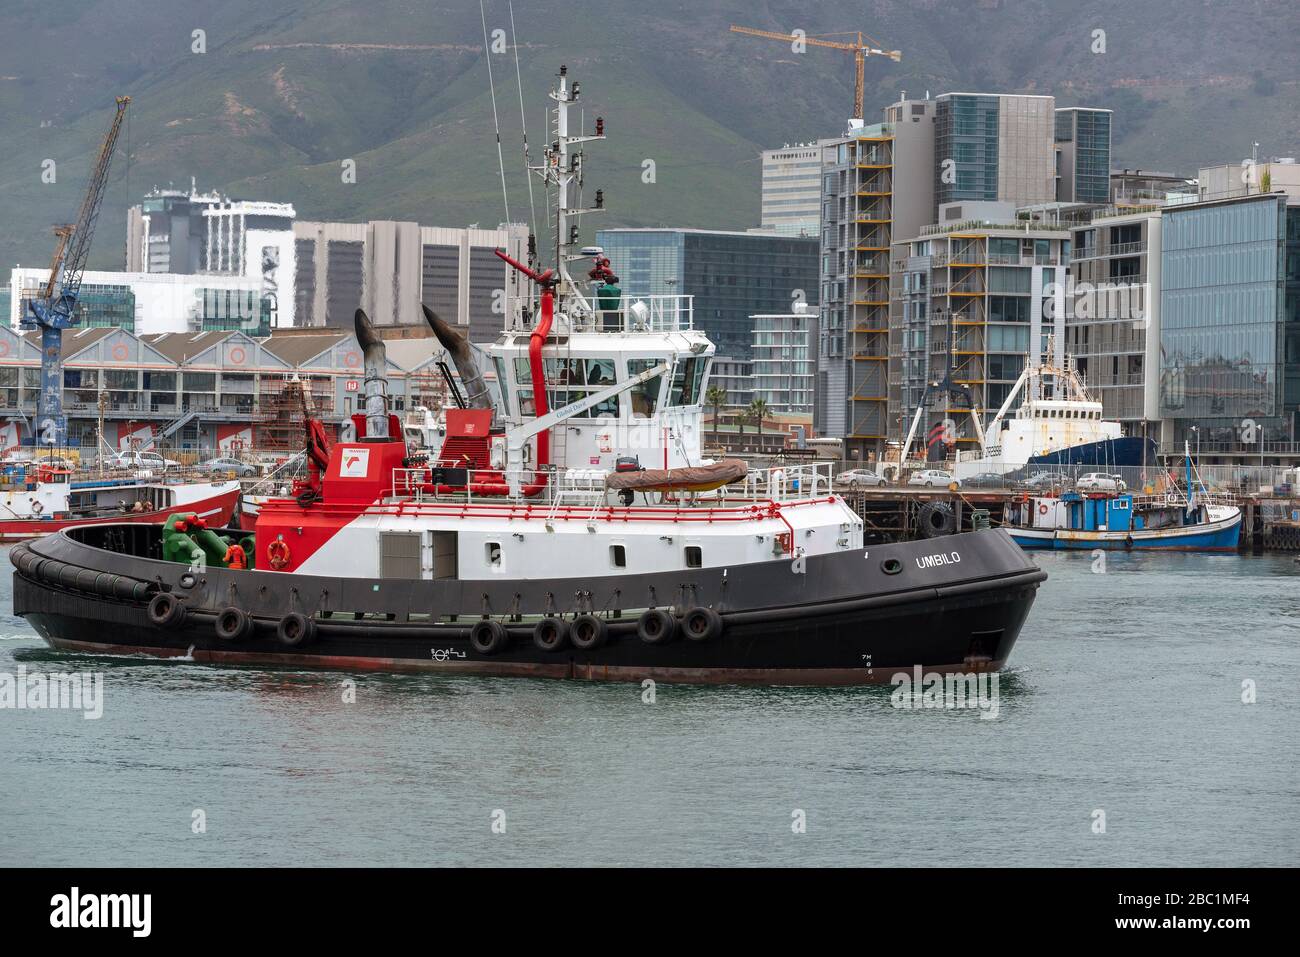 Cape Town, South Africa. 2019. Umbilo a working tug underway on Cape Town Harbour, South Africa. Stock Photo